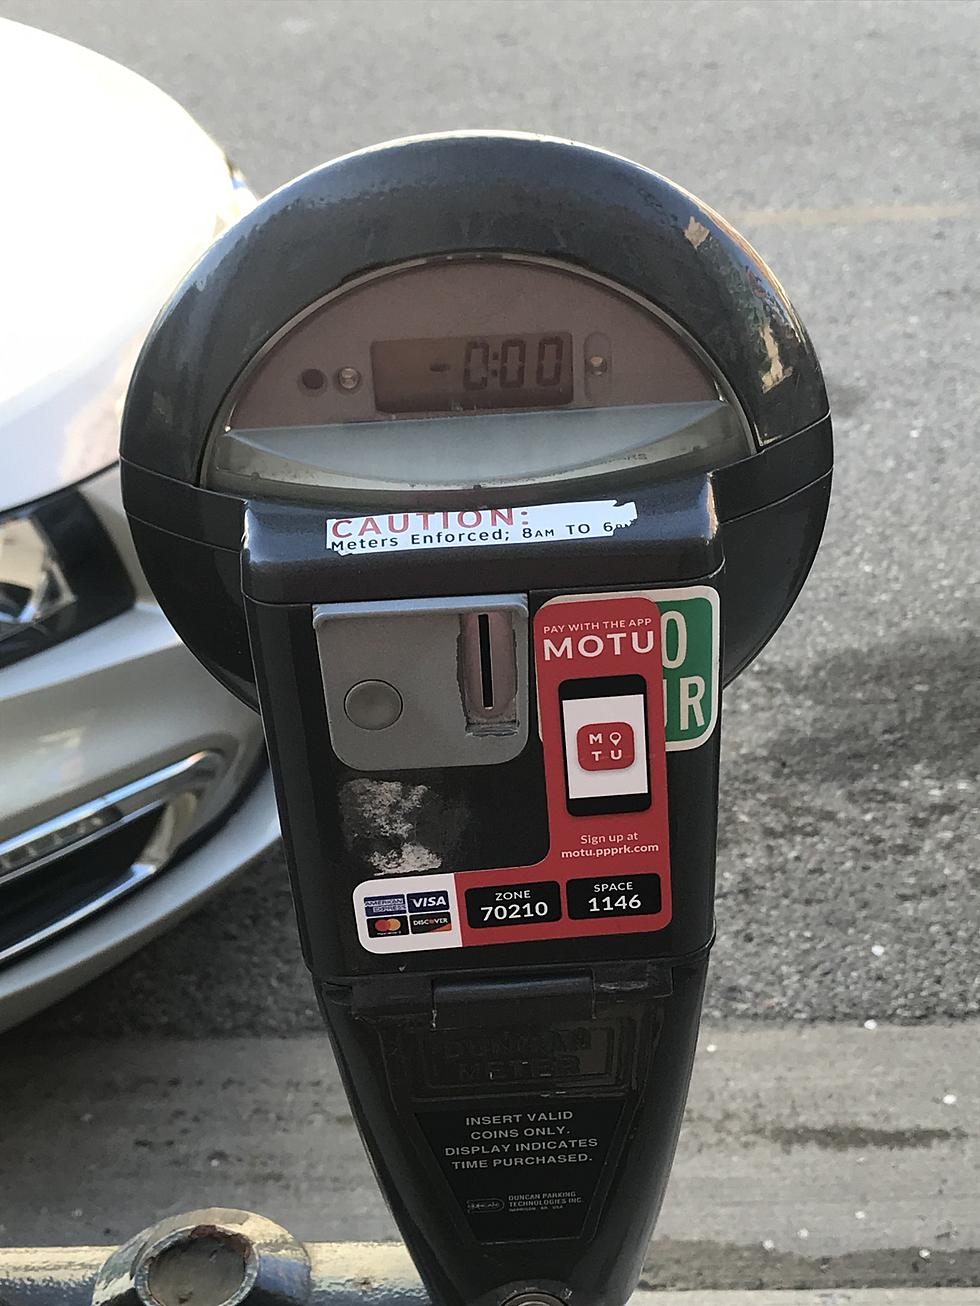 Quit Paying For Parking In Downtown GR When You Don’t Need To